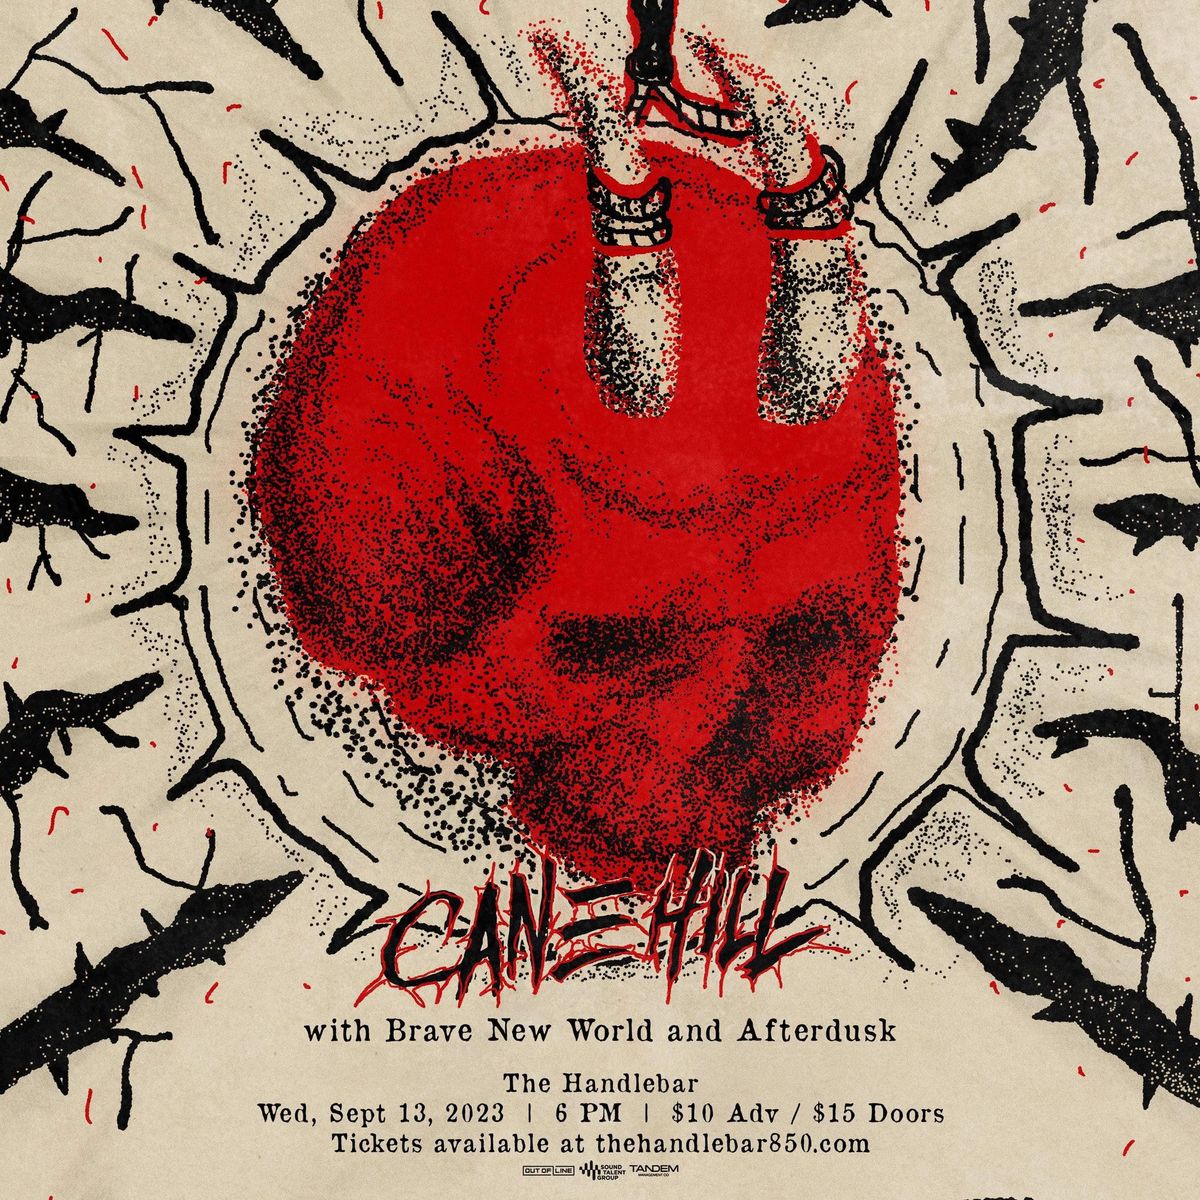 Cane Hill And Crew To Invade The Handlebar Soon!